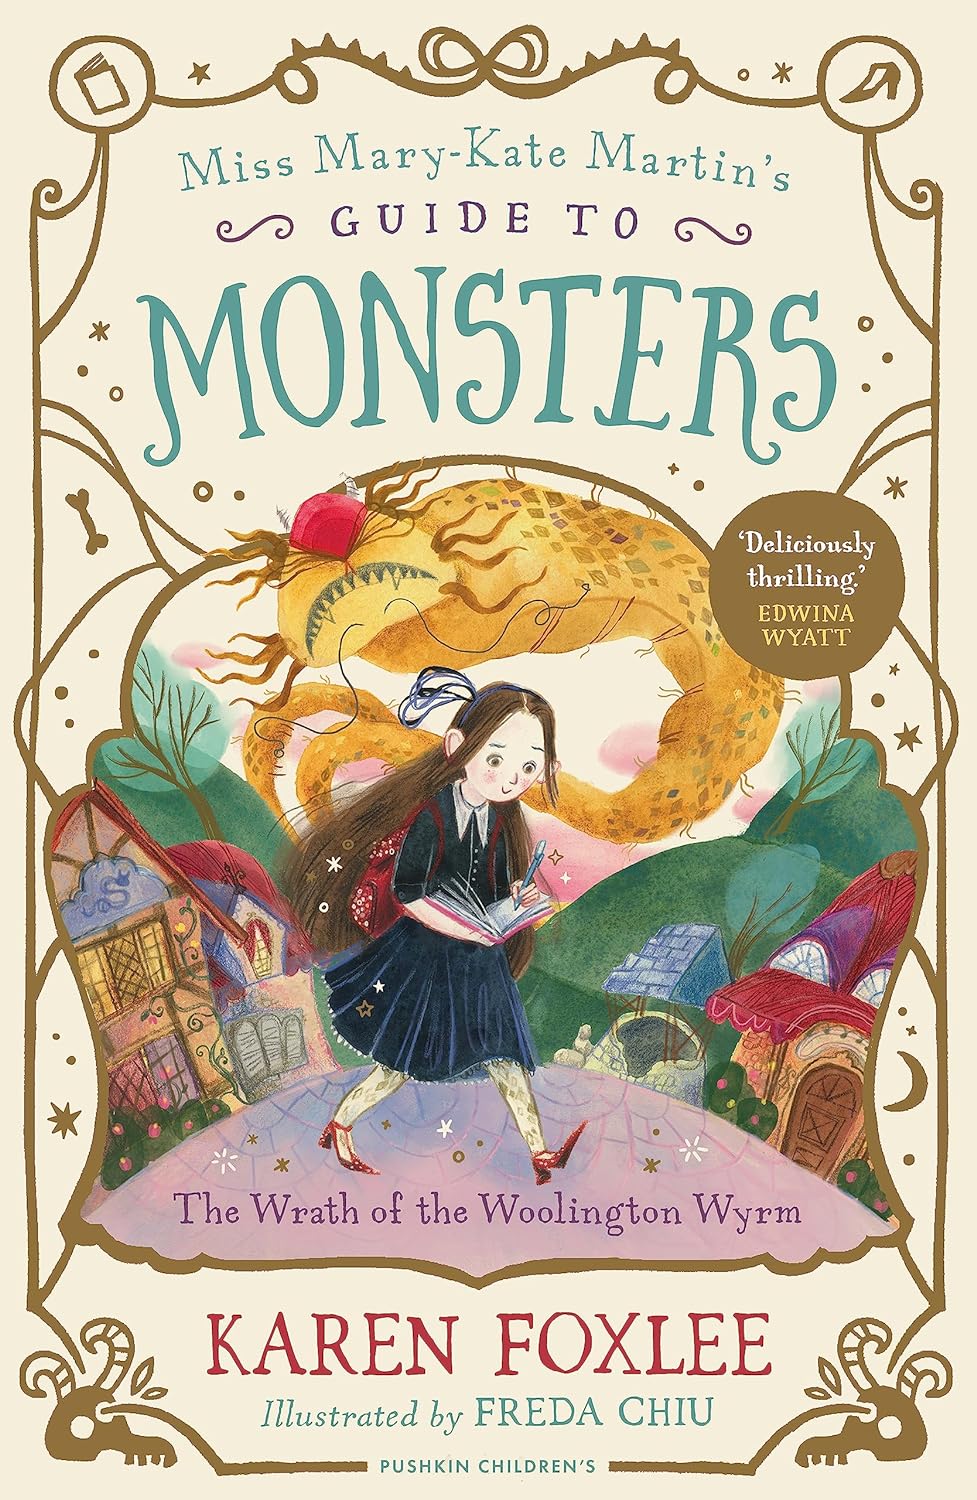 The Wrath of the Woolington Wyrm (Miss Mary-Kate Martin's Guide to Monsters)